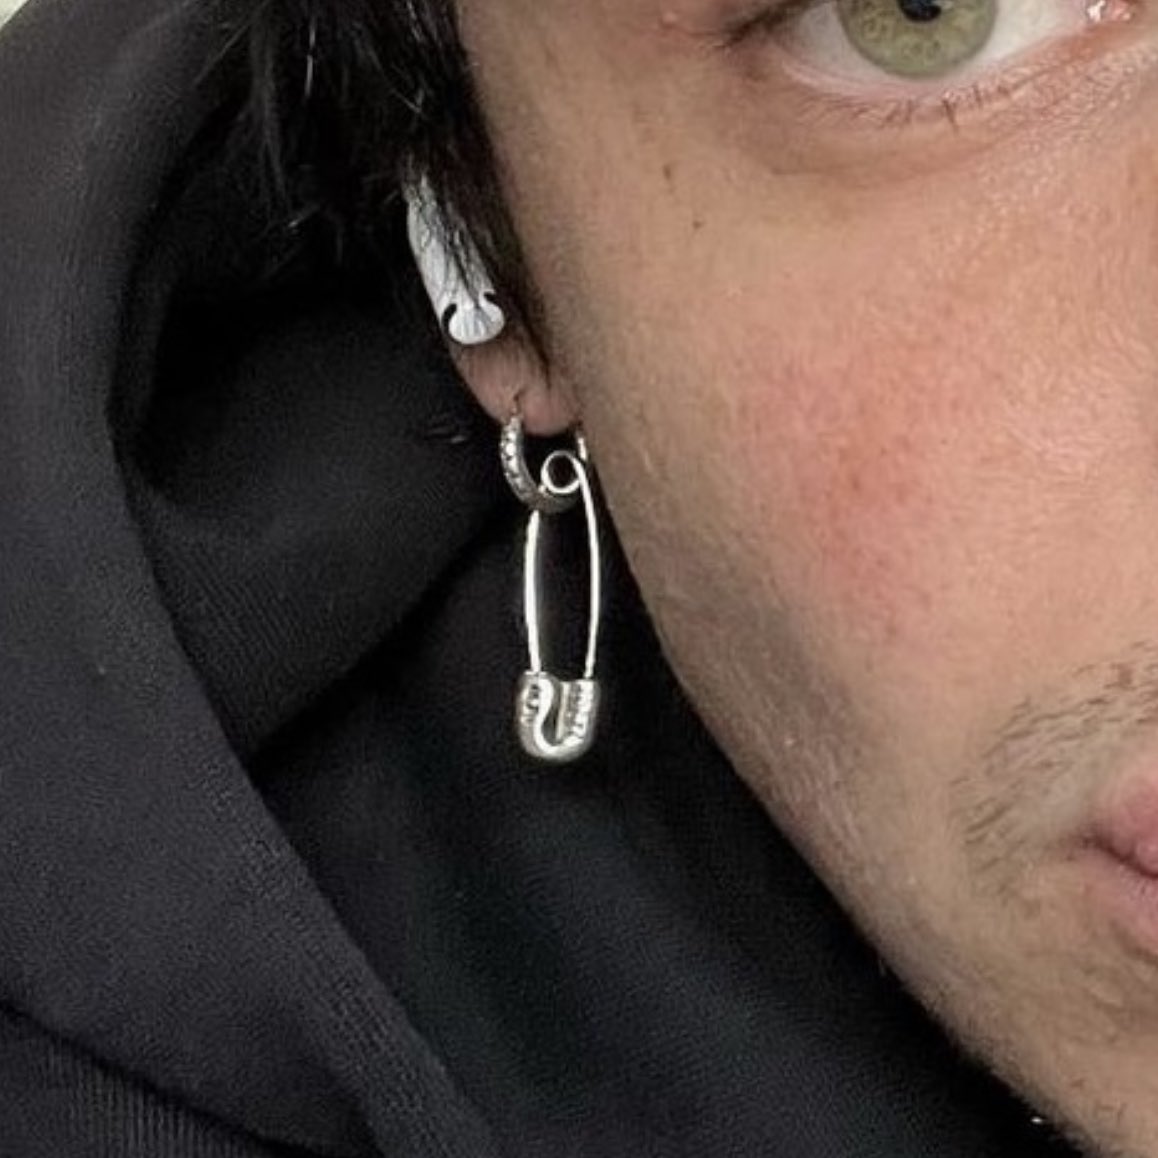 appreciation post for his lil earring